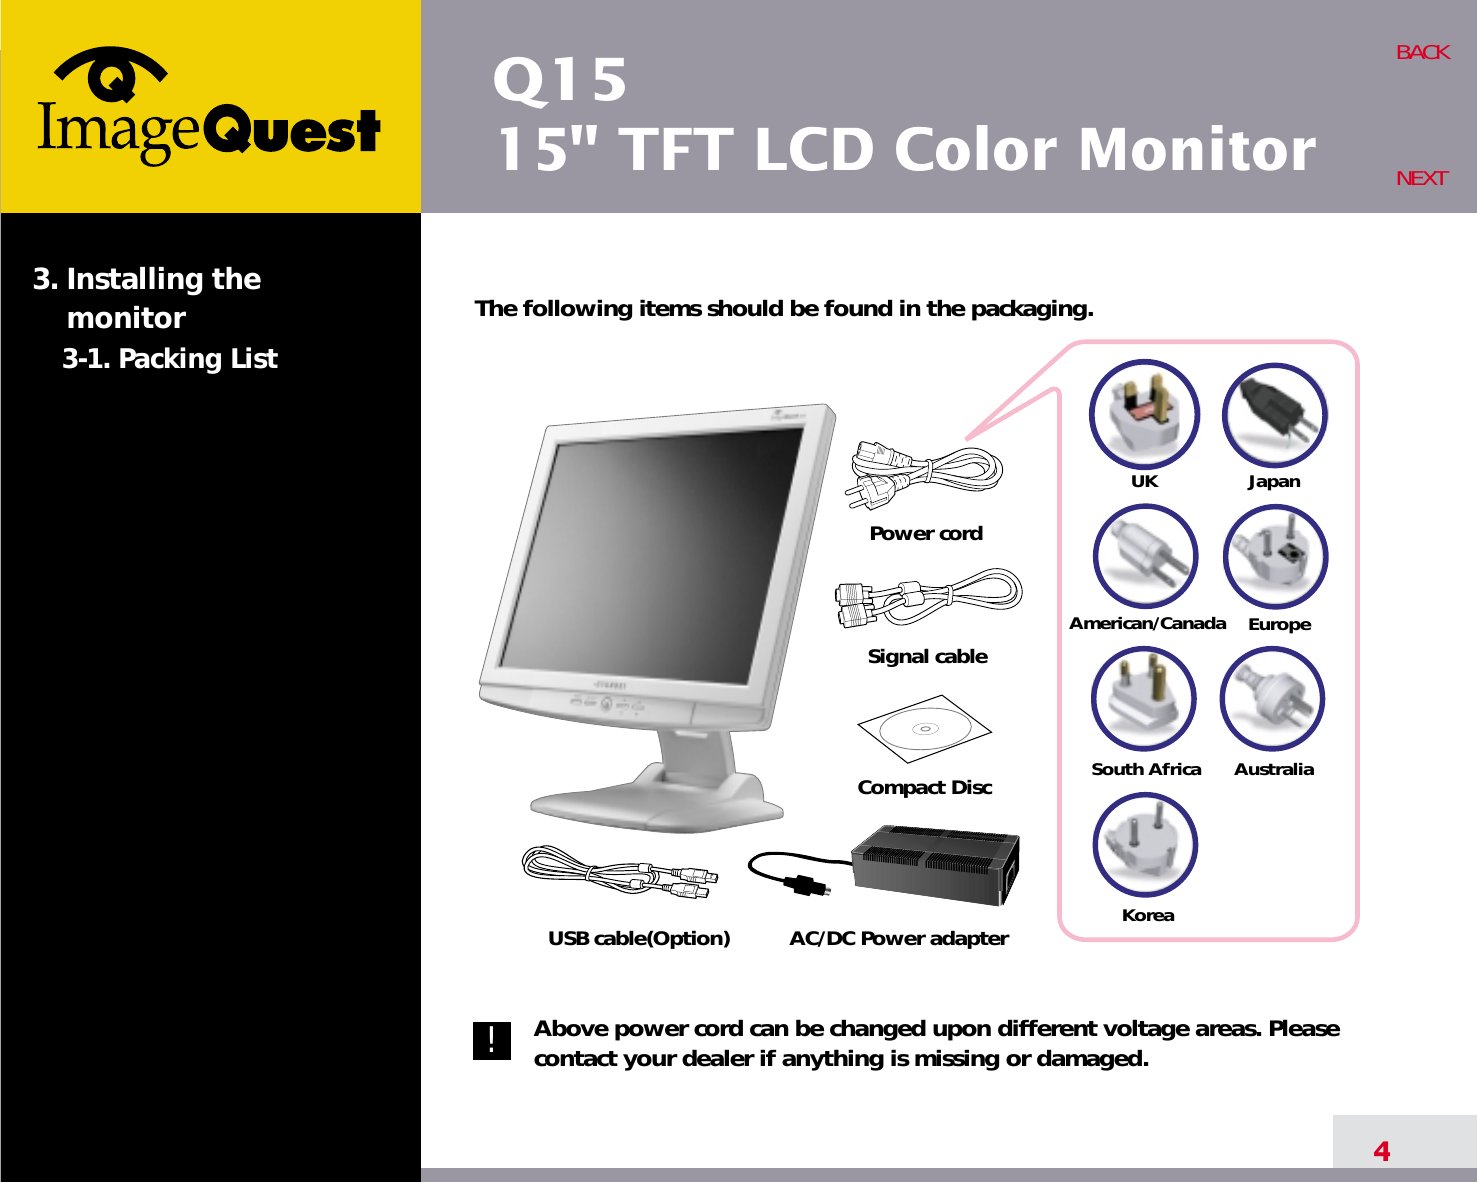 Q1515&quot; TFT LCD Color Monitor4BACKNEXTThe following items should be found in the packaging.Above power cord can be changed upon different voltage areas. Pleasecontact your dealer if anything is missing or damaged.3. Installing the monitor3-1. Packing List!UKAmerican/CanadaJapanAustraliaKoreaEuropeSouth AfricaPower cordSignal cableAC/DC Power adapterUSB cable(Option)Compact Disc